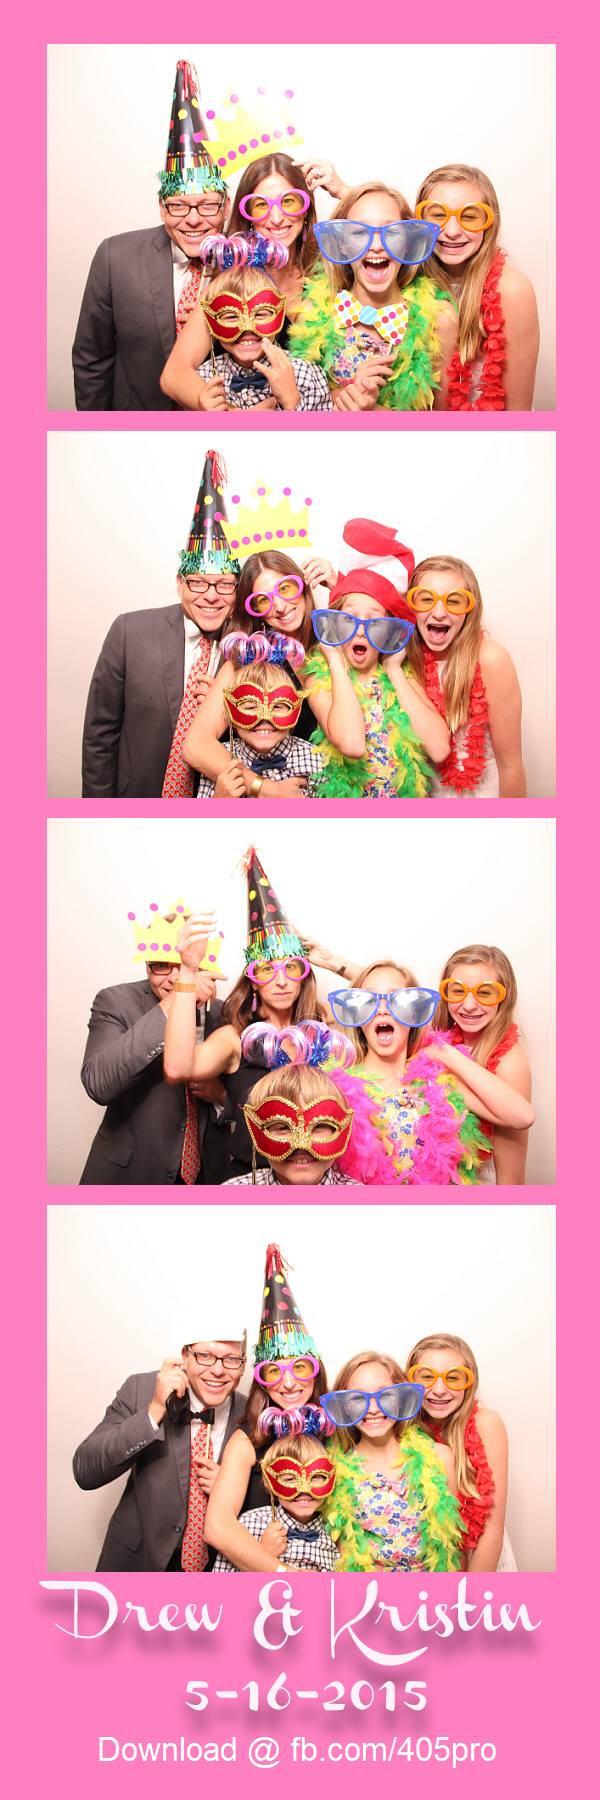 Oklahoma Norman Photo Booth Rentals The Manor At Coffee Creek